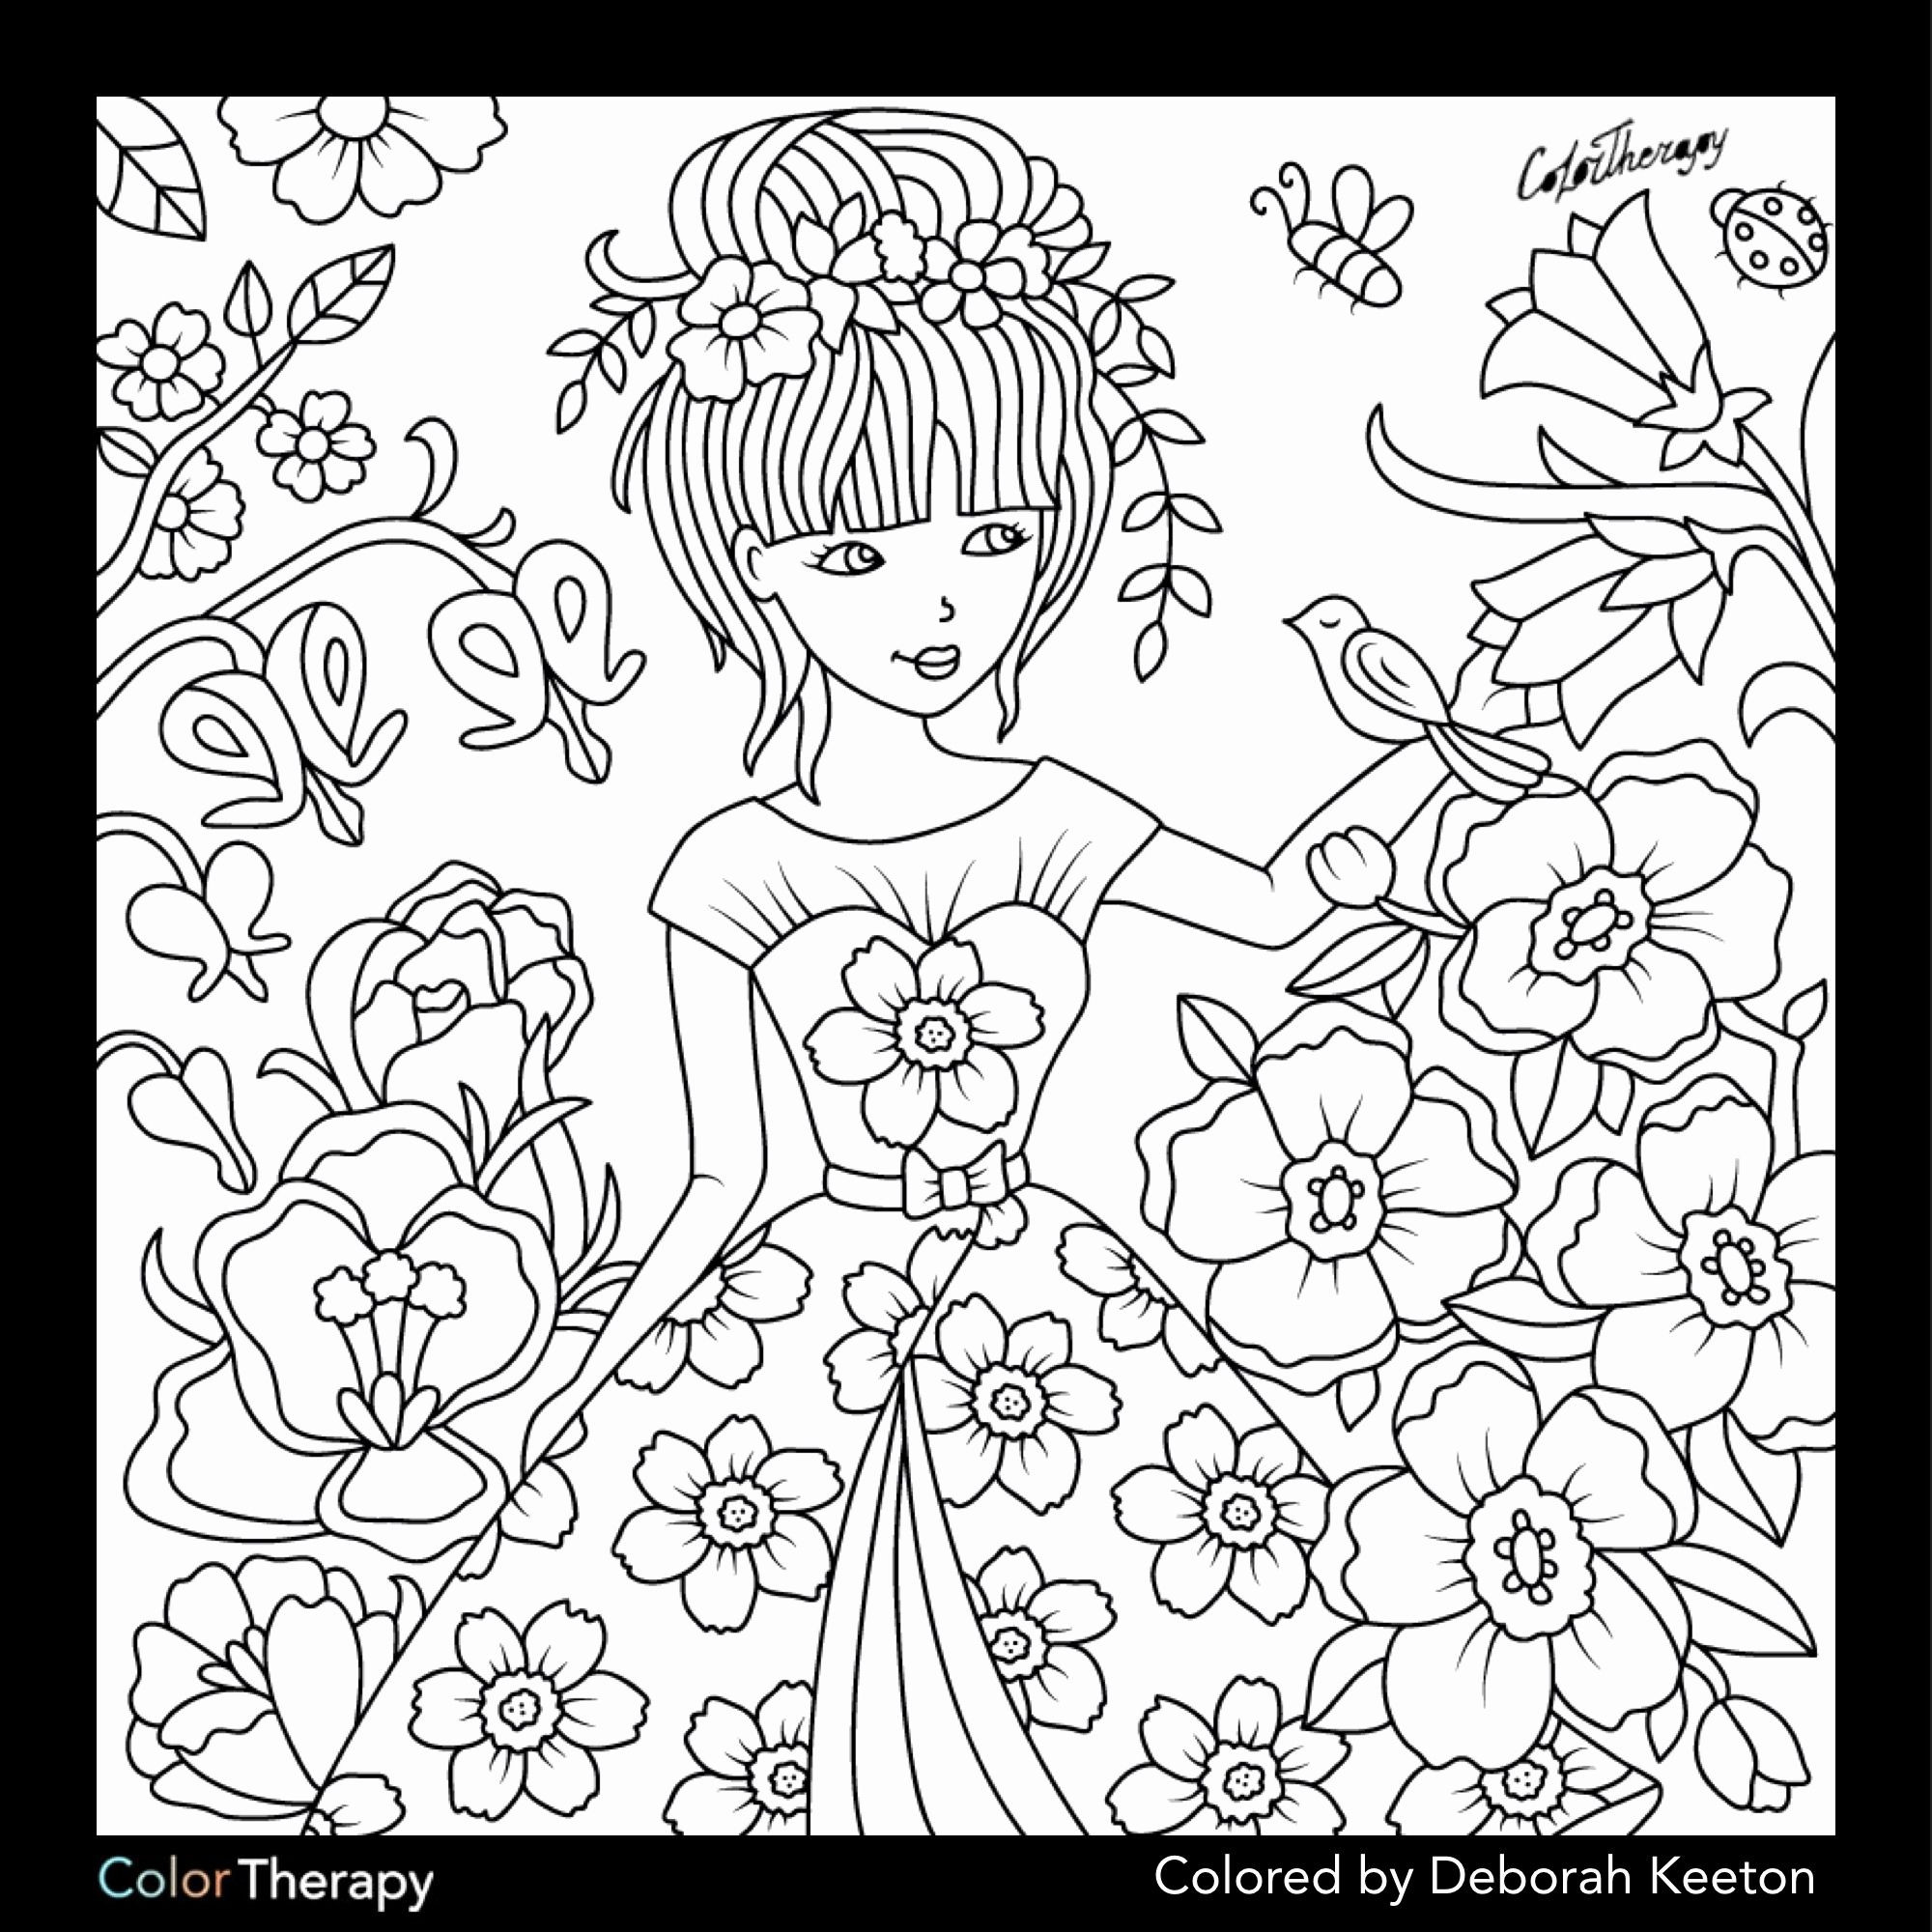 vw flower vase of flower in a vase new cool moana coloring pages beautiful cool vases regarding flower in a vase new cool moana coloring pages beautiful cool vases flower vase coloring